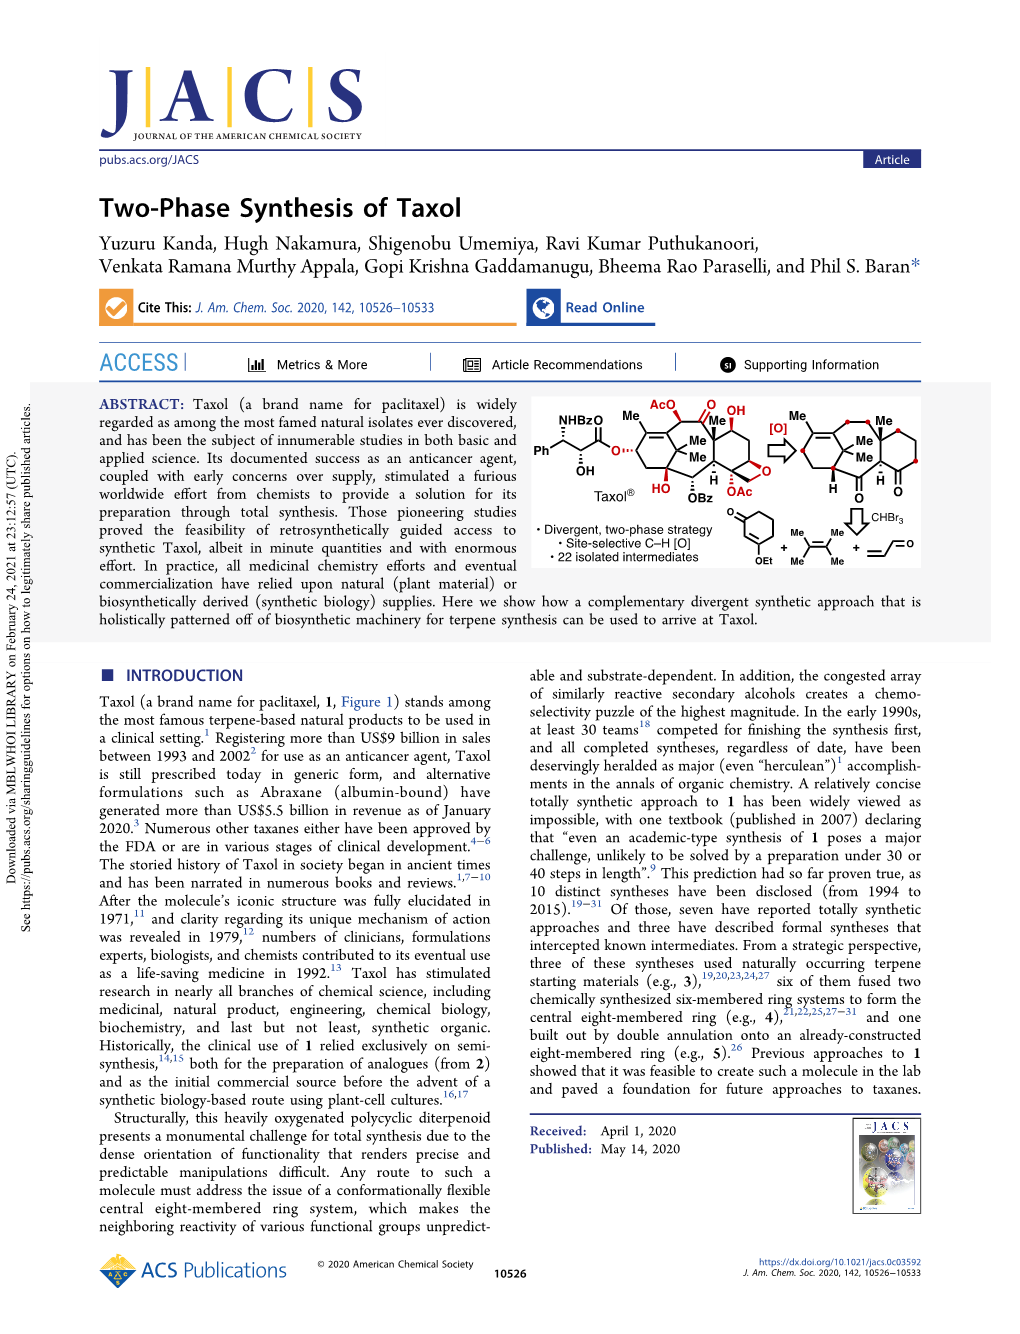 Two-Phase Synthesis of Taxol